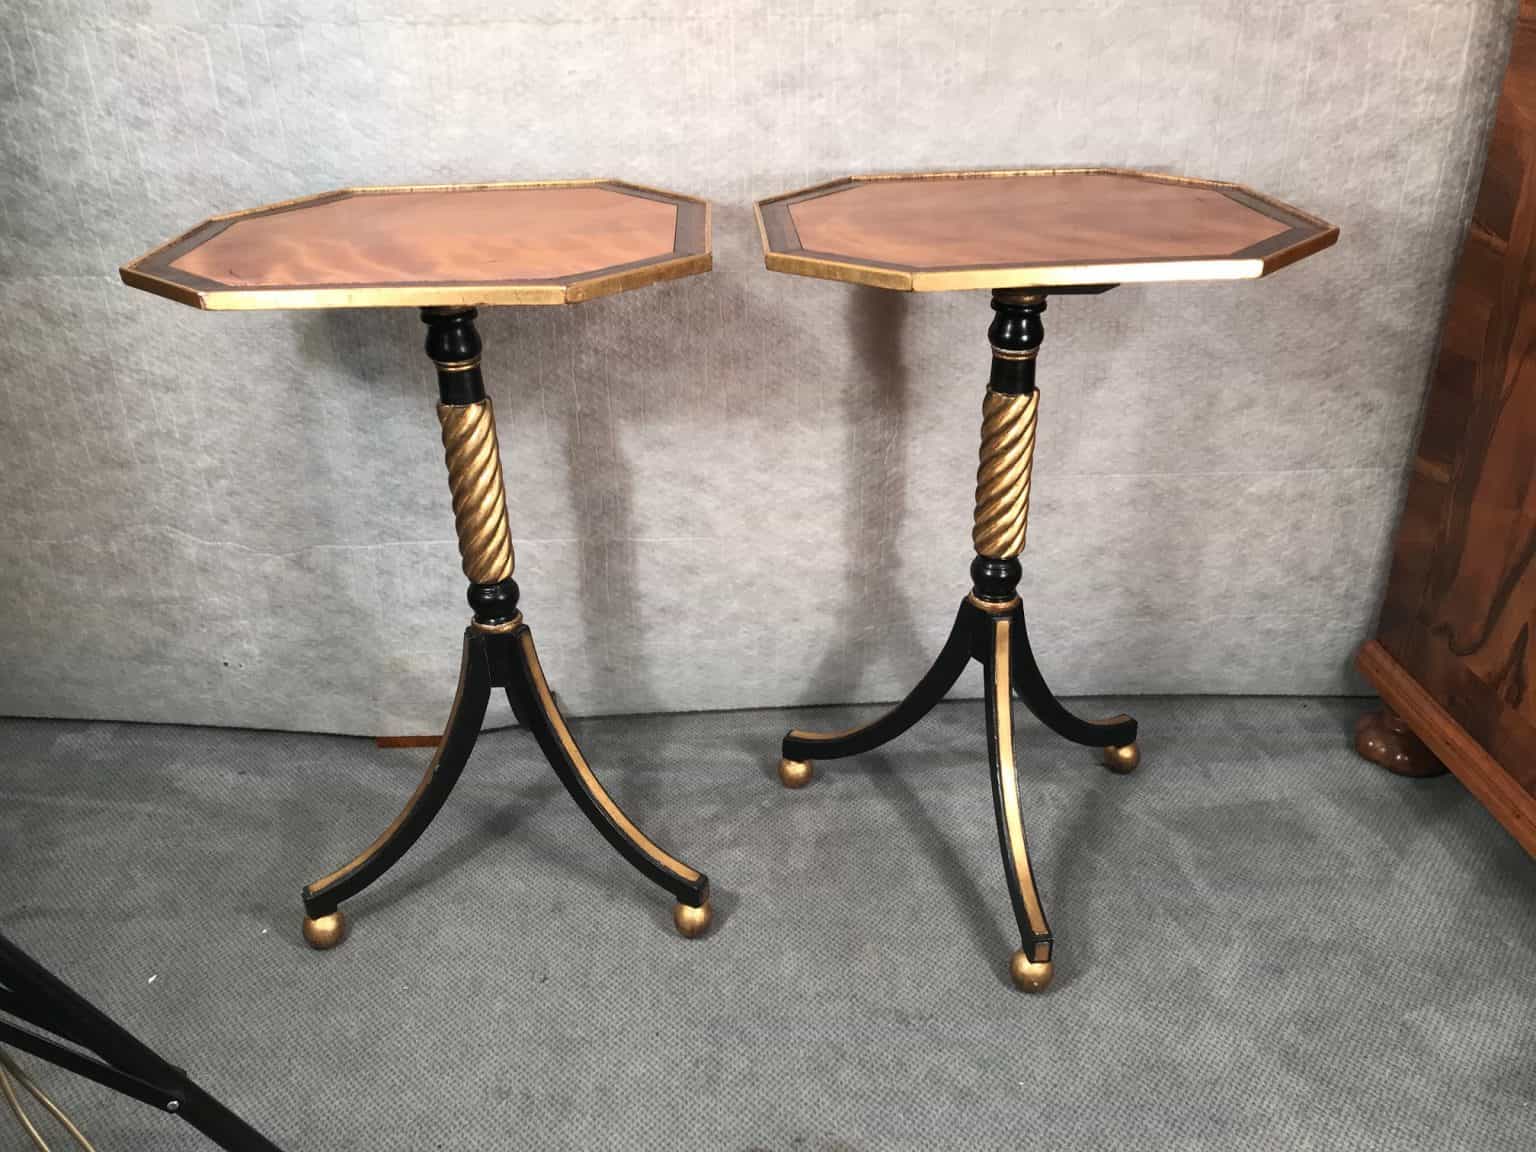 Pair of Side Tables- France 19th century- for sale- Styylish